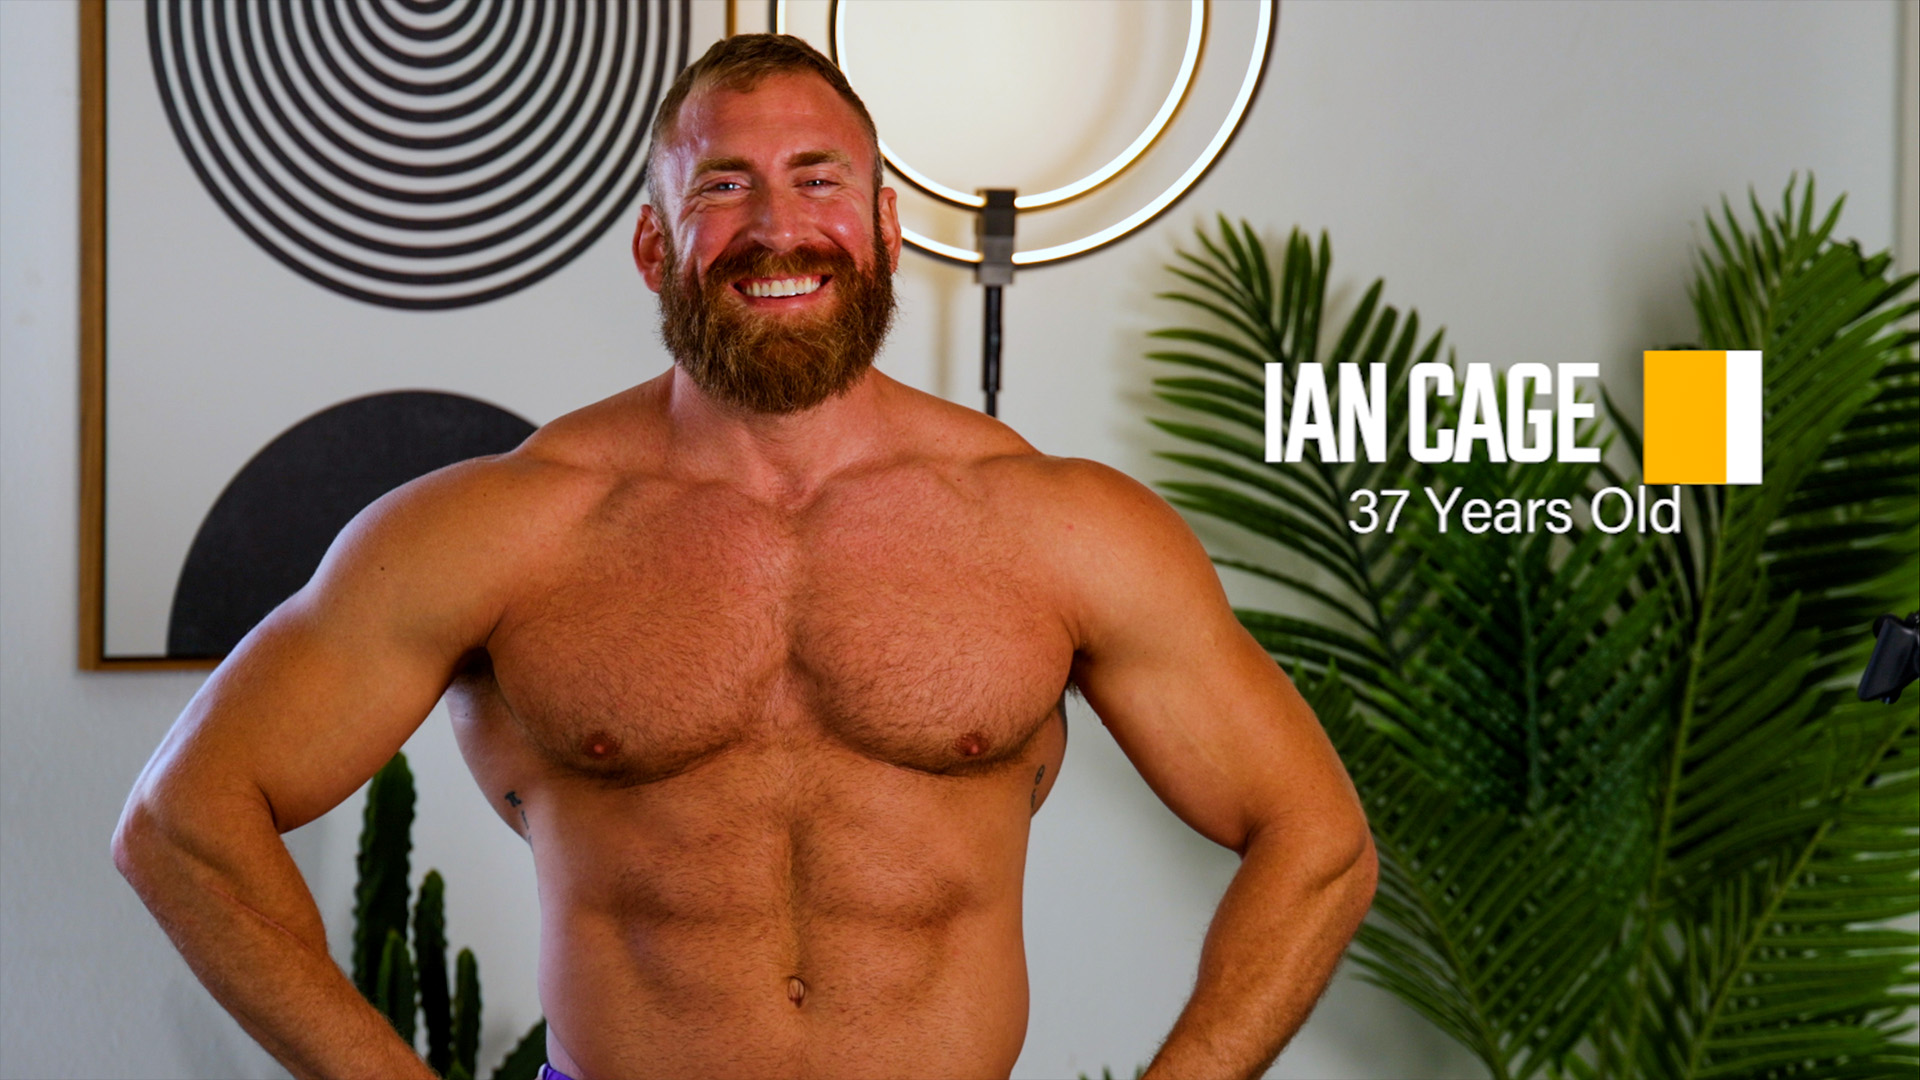 Interview: Ian Cage Tells All